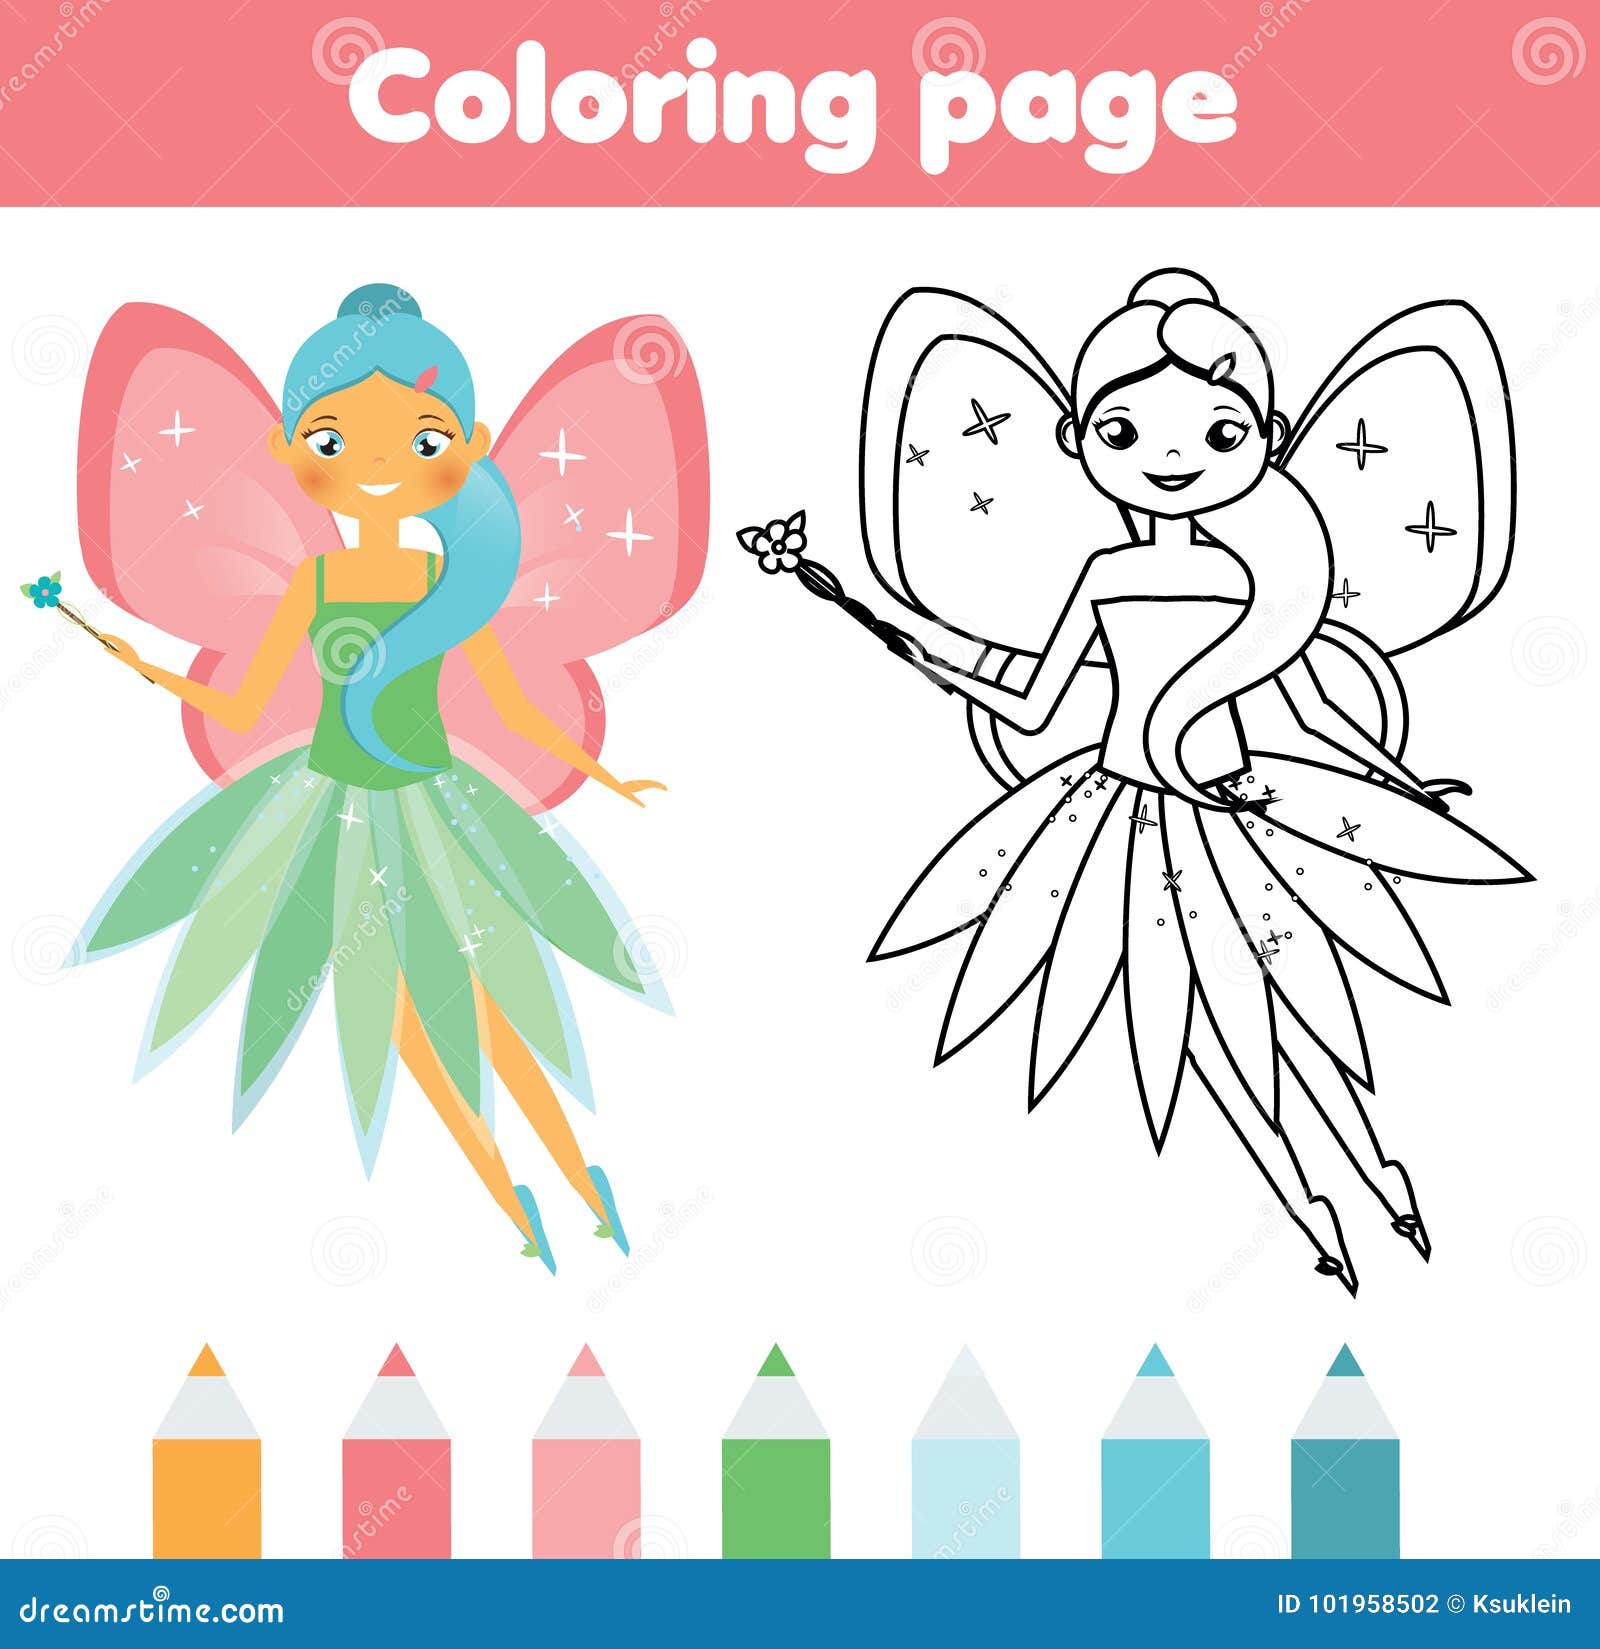 Four Flower Fairy Coloring Pages. Kids coloring (3179330)